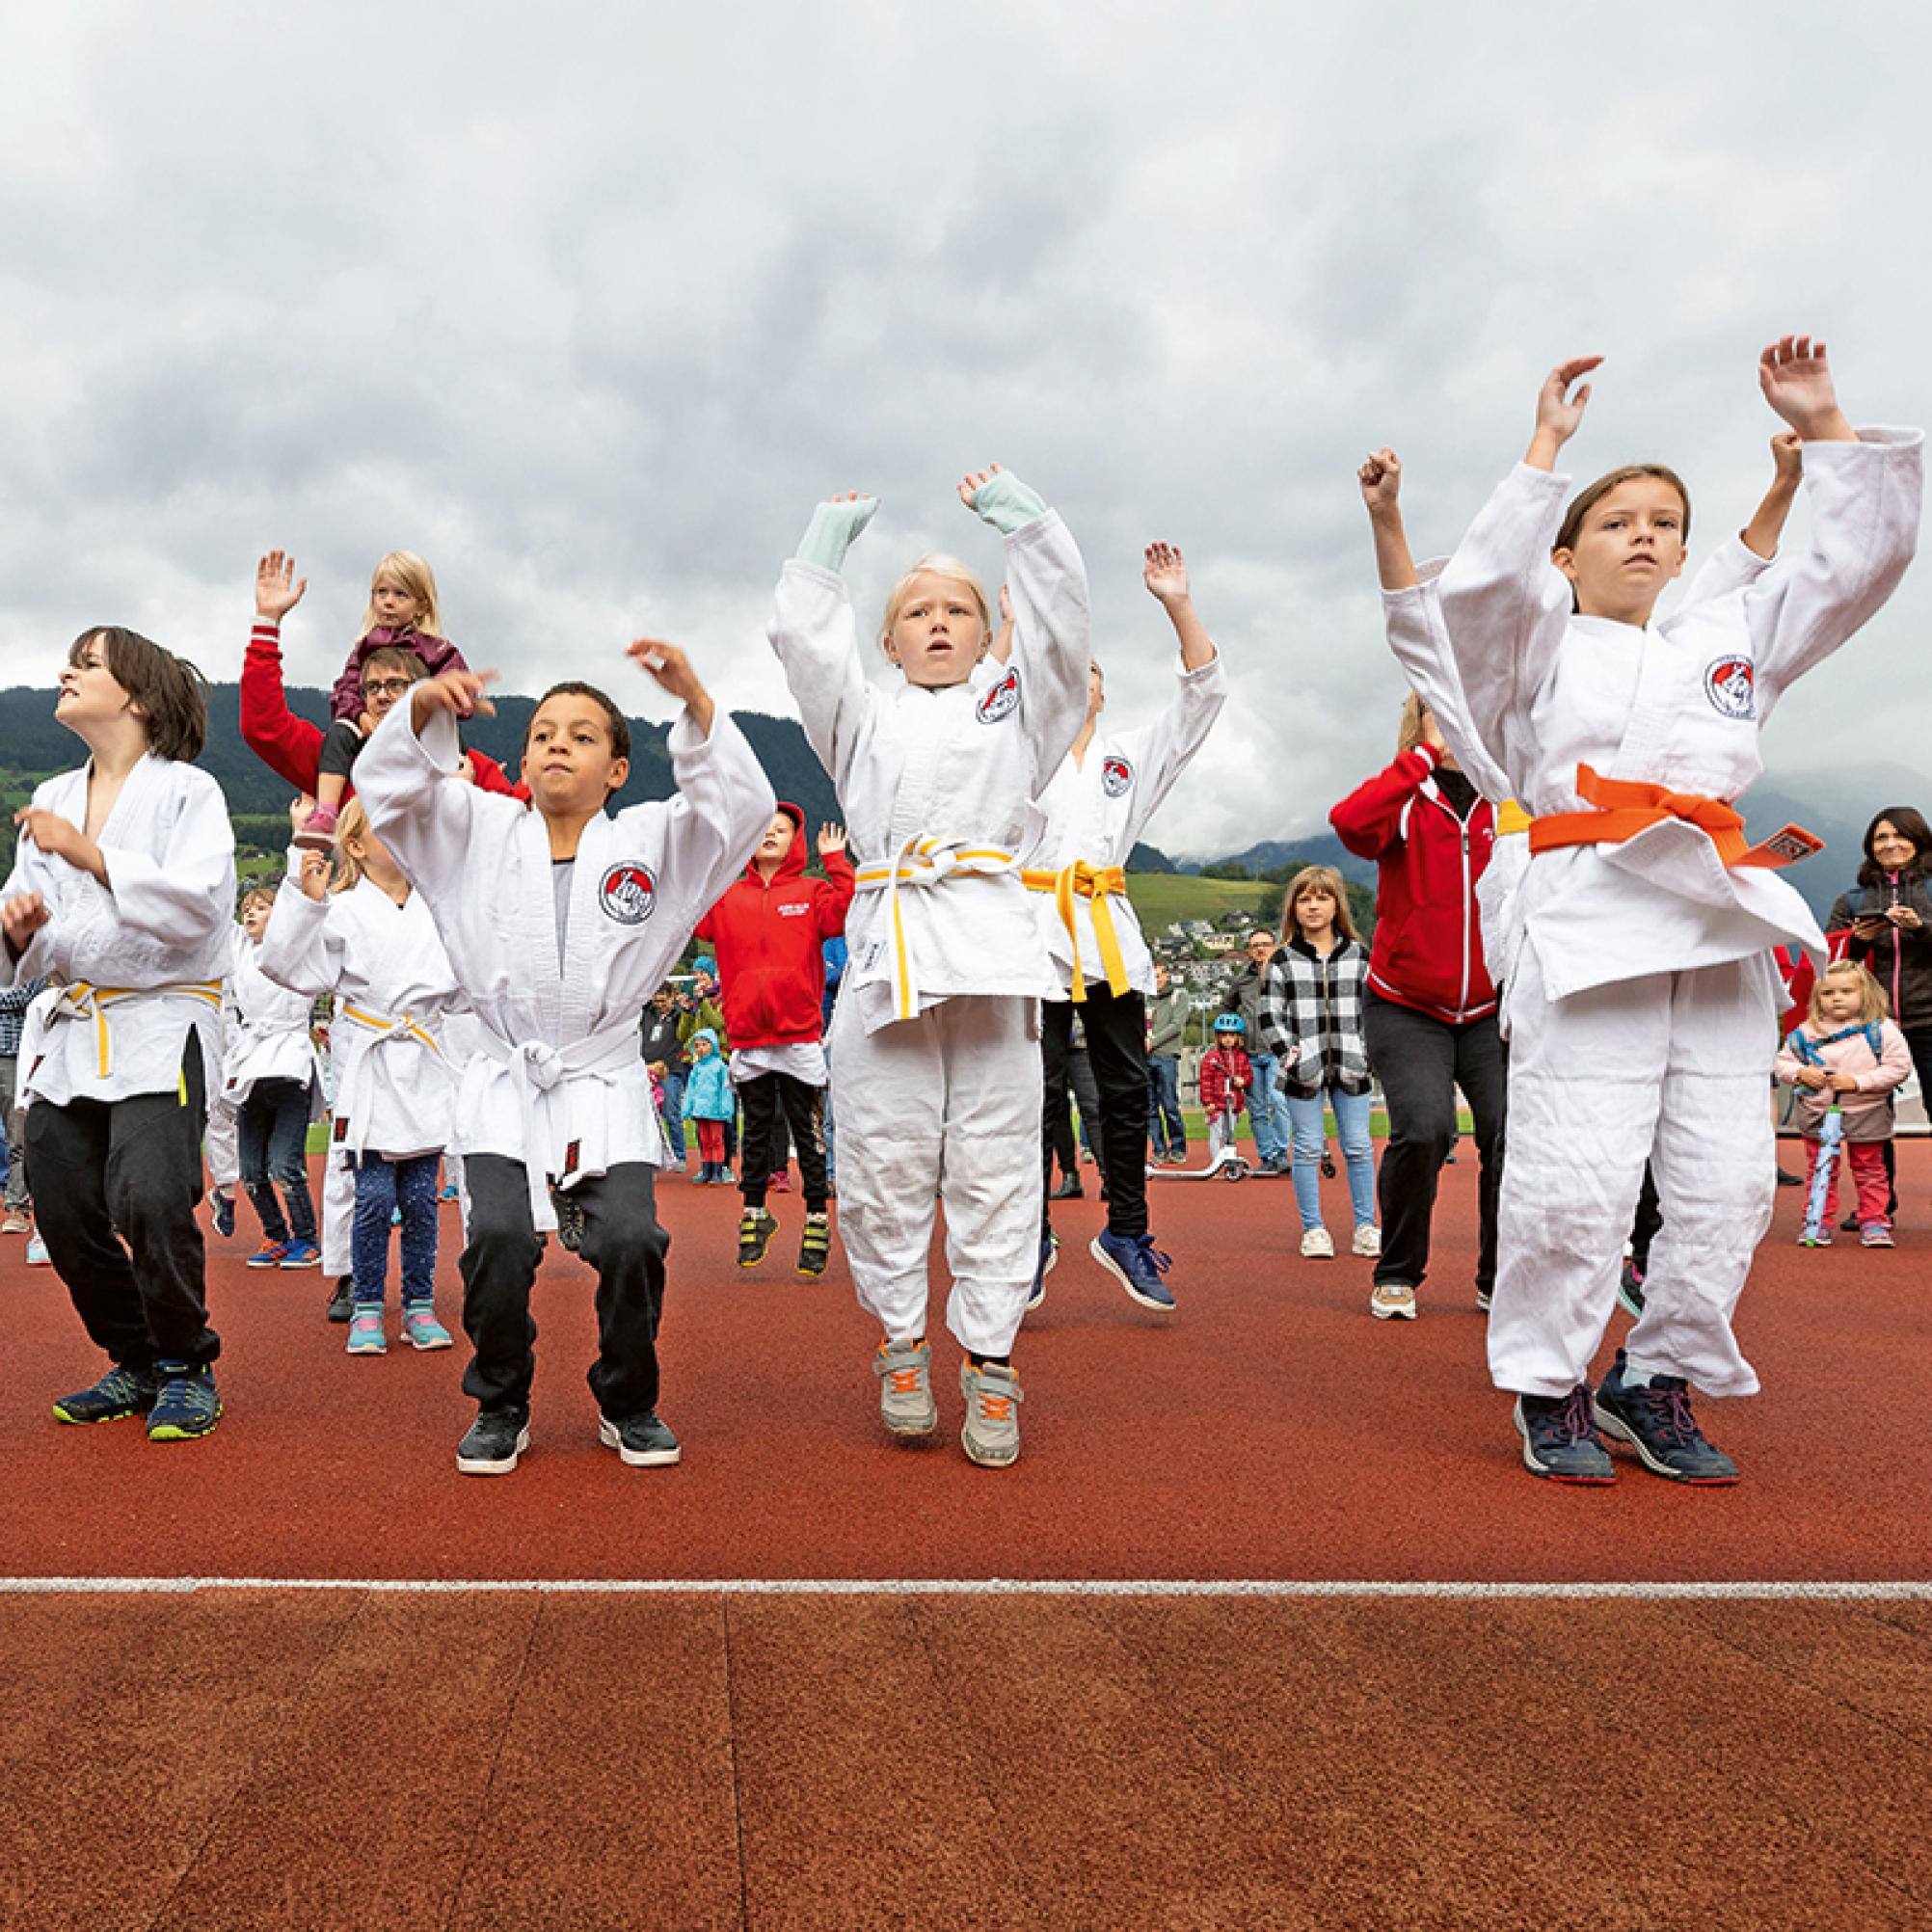 The photo shows a group of children in judo attire. They all jump in the air simultaneously.